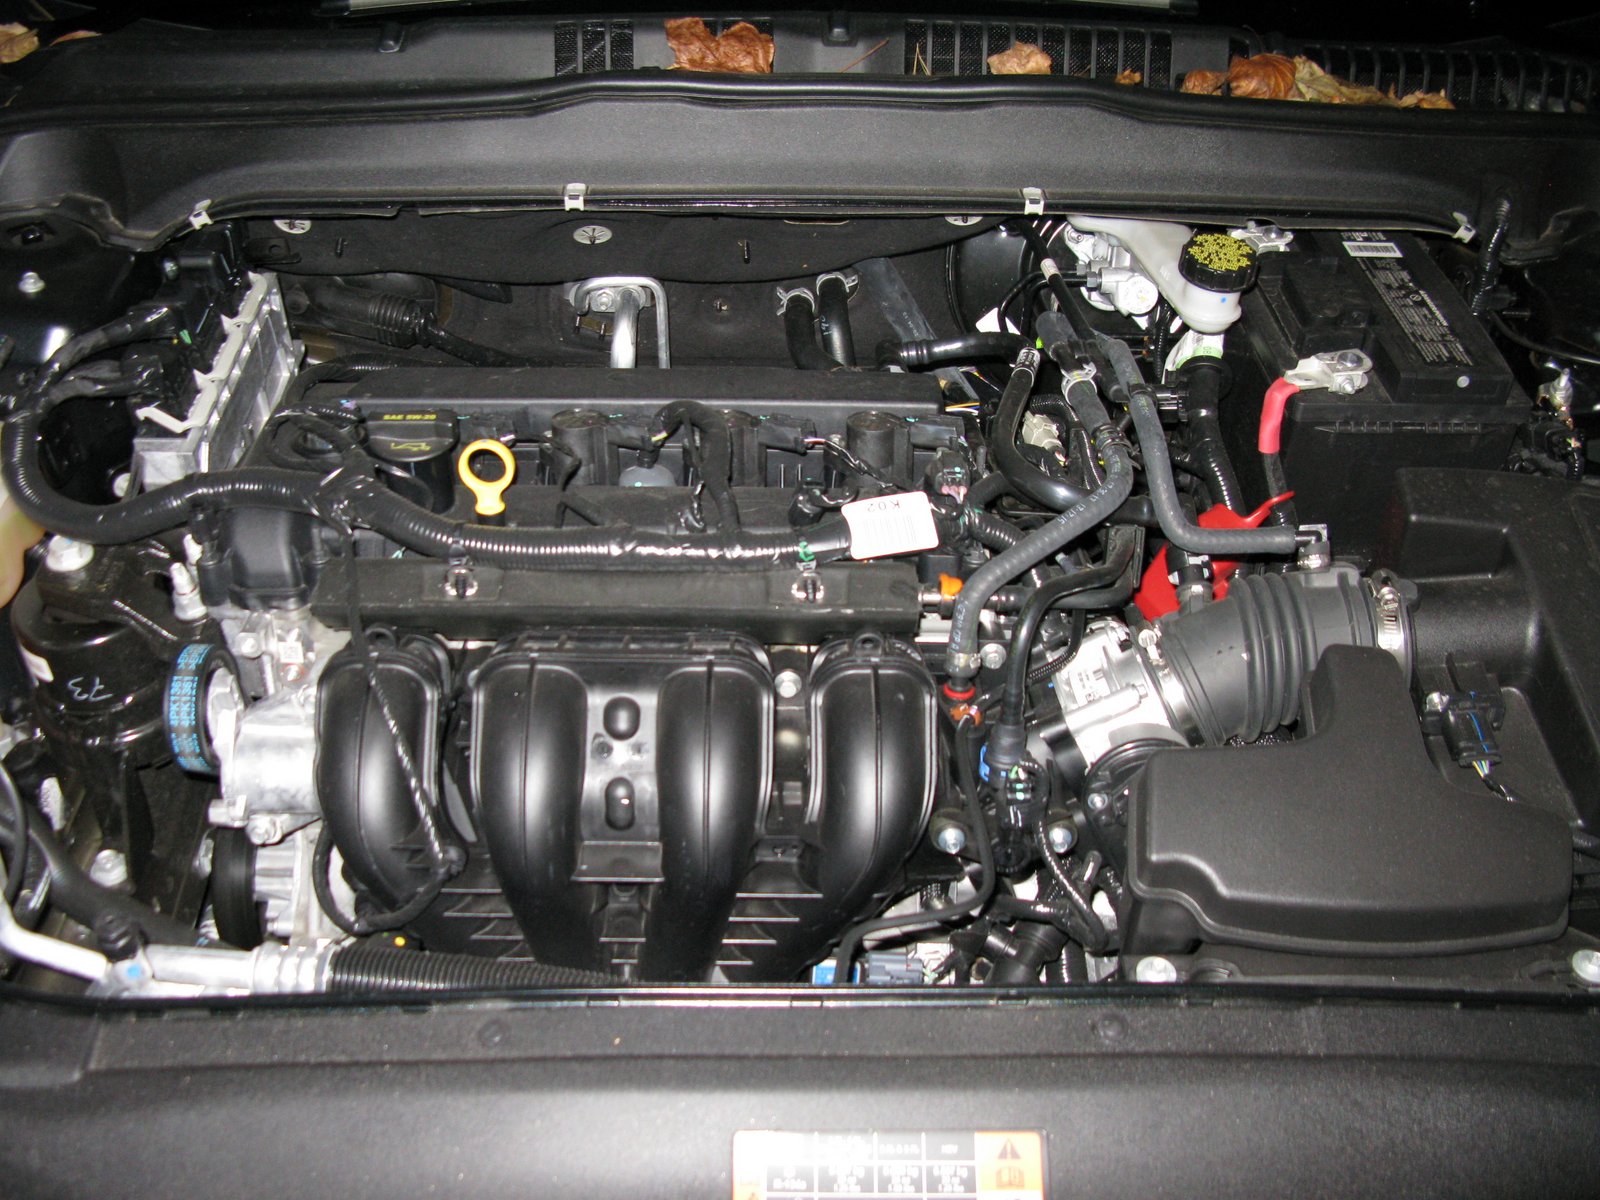 The Fusion's engine. Nearly identical to the MZR engine layout I had in my former Mazda3. Hmm, I wonder why...